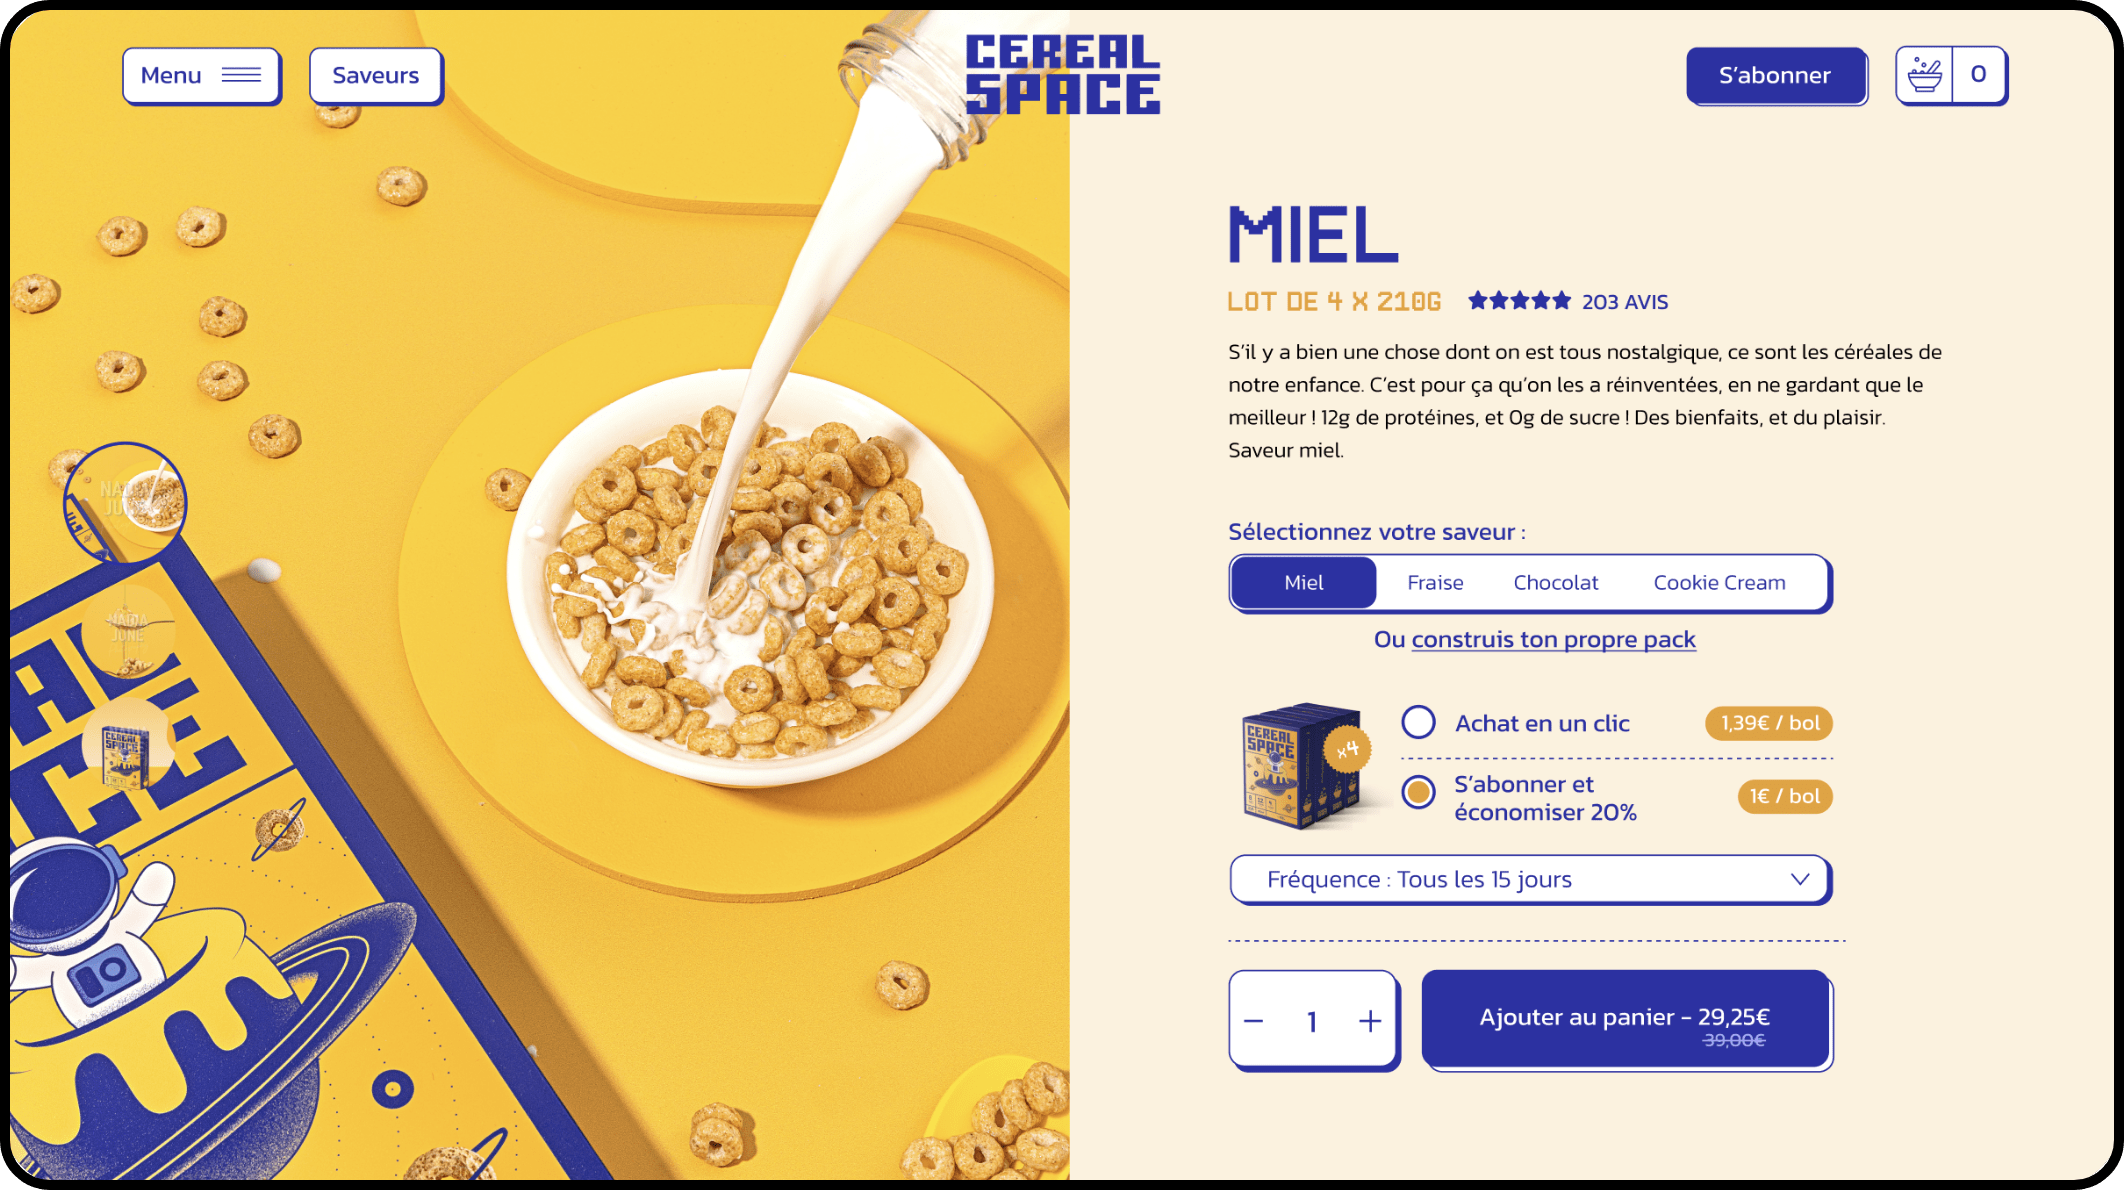 patrick-morvan-design-Cereal-space-product-page-min